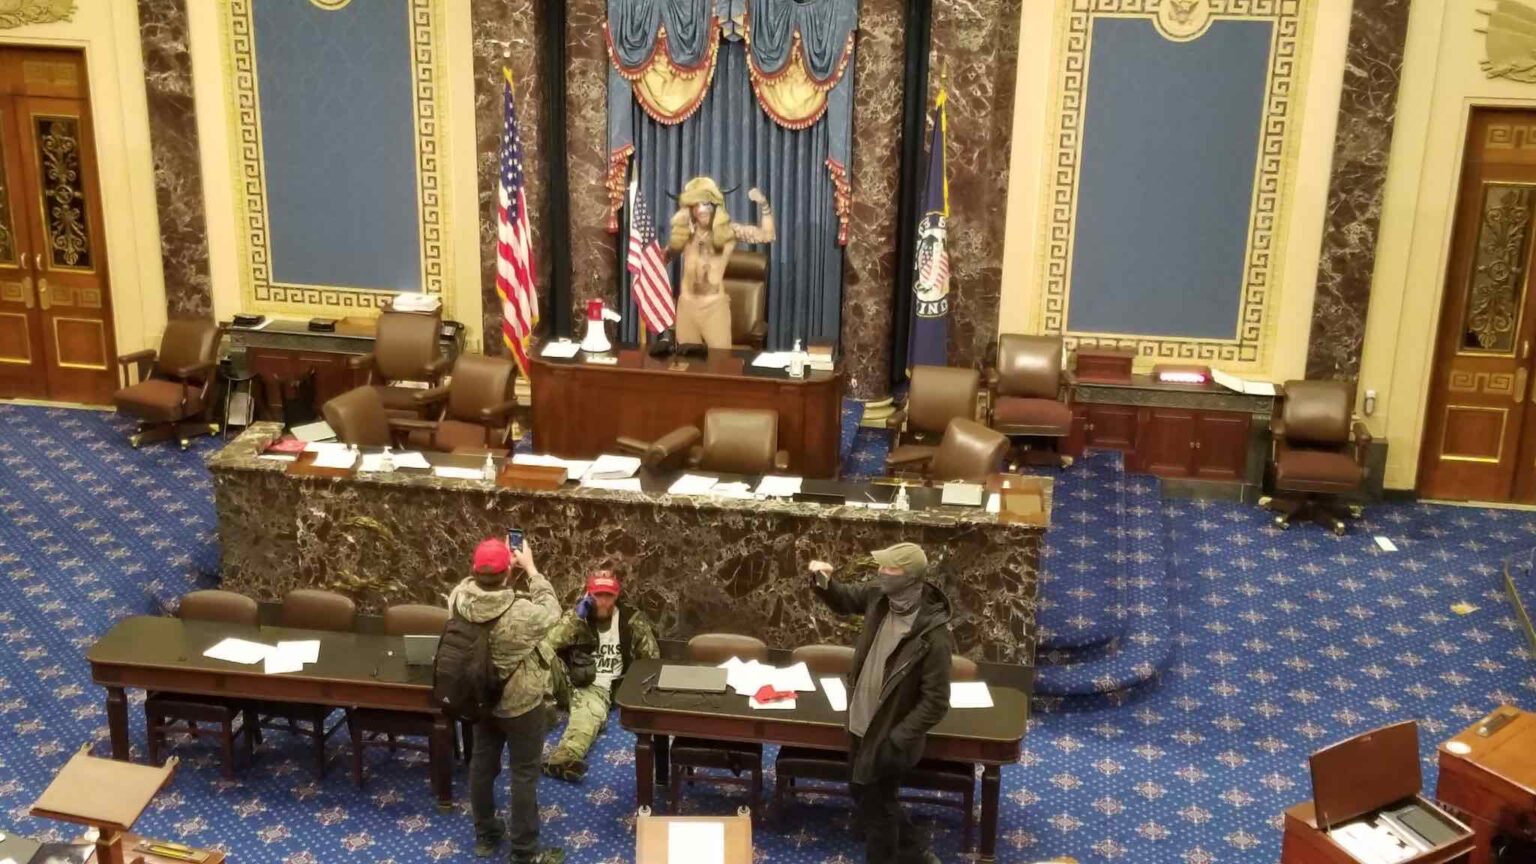 Protesters stormed and occupied the U.S. Capitol building today to disrupt the electoral confirmation process. Was security better in Area 51?